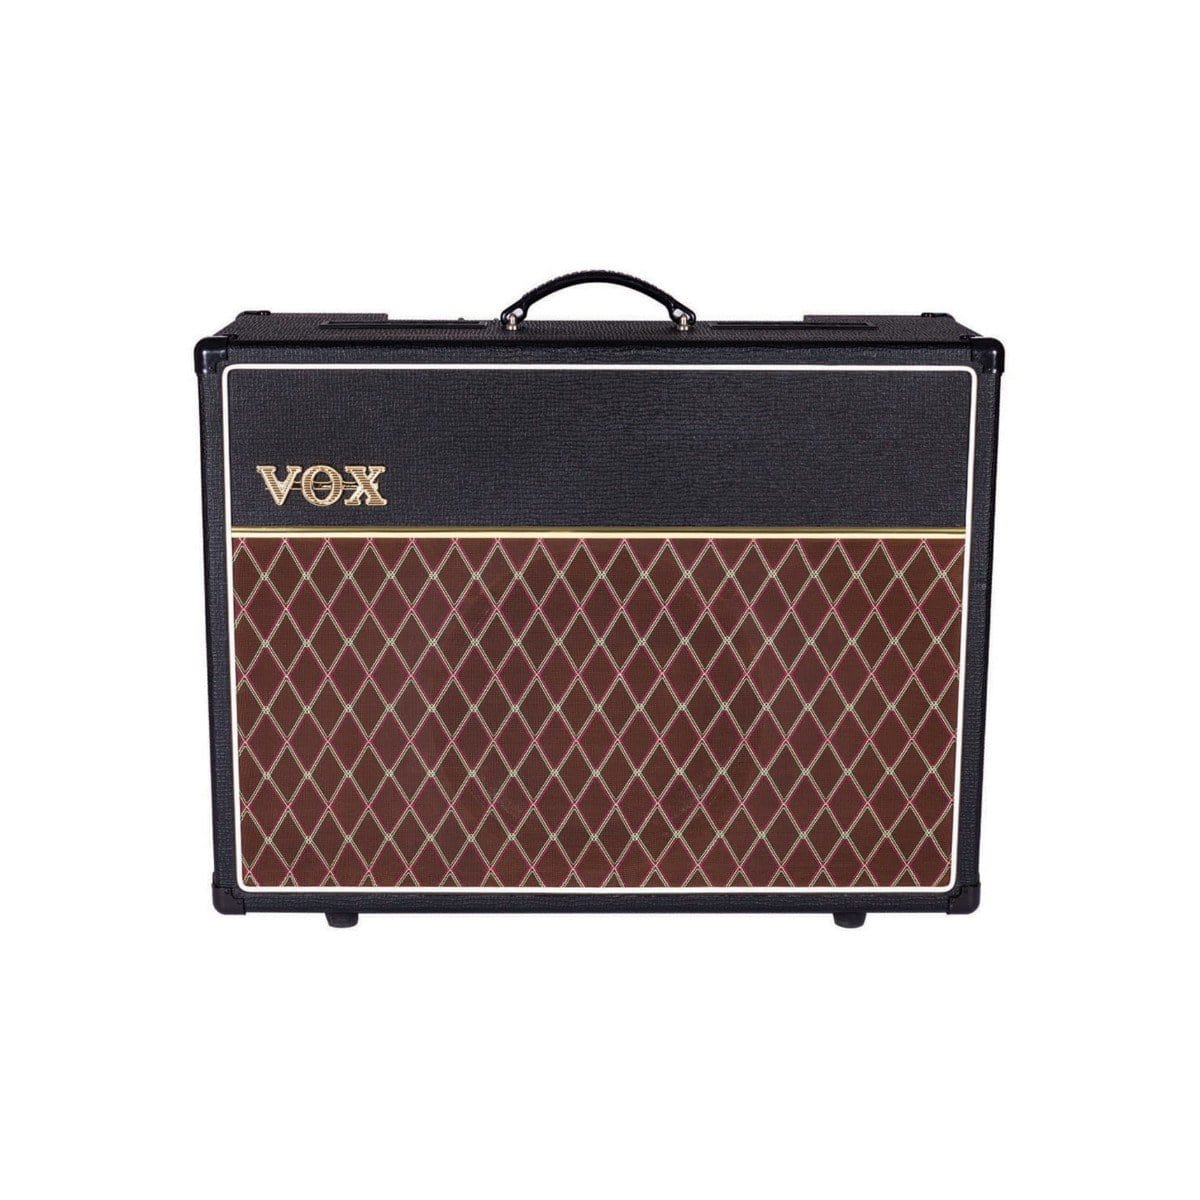 Vox Amps Vox AC30 Combo 1 x 12" - Byron Music